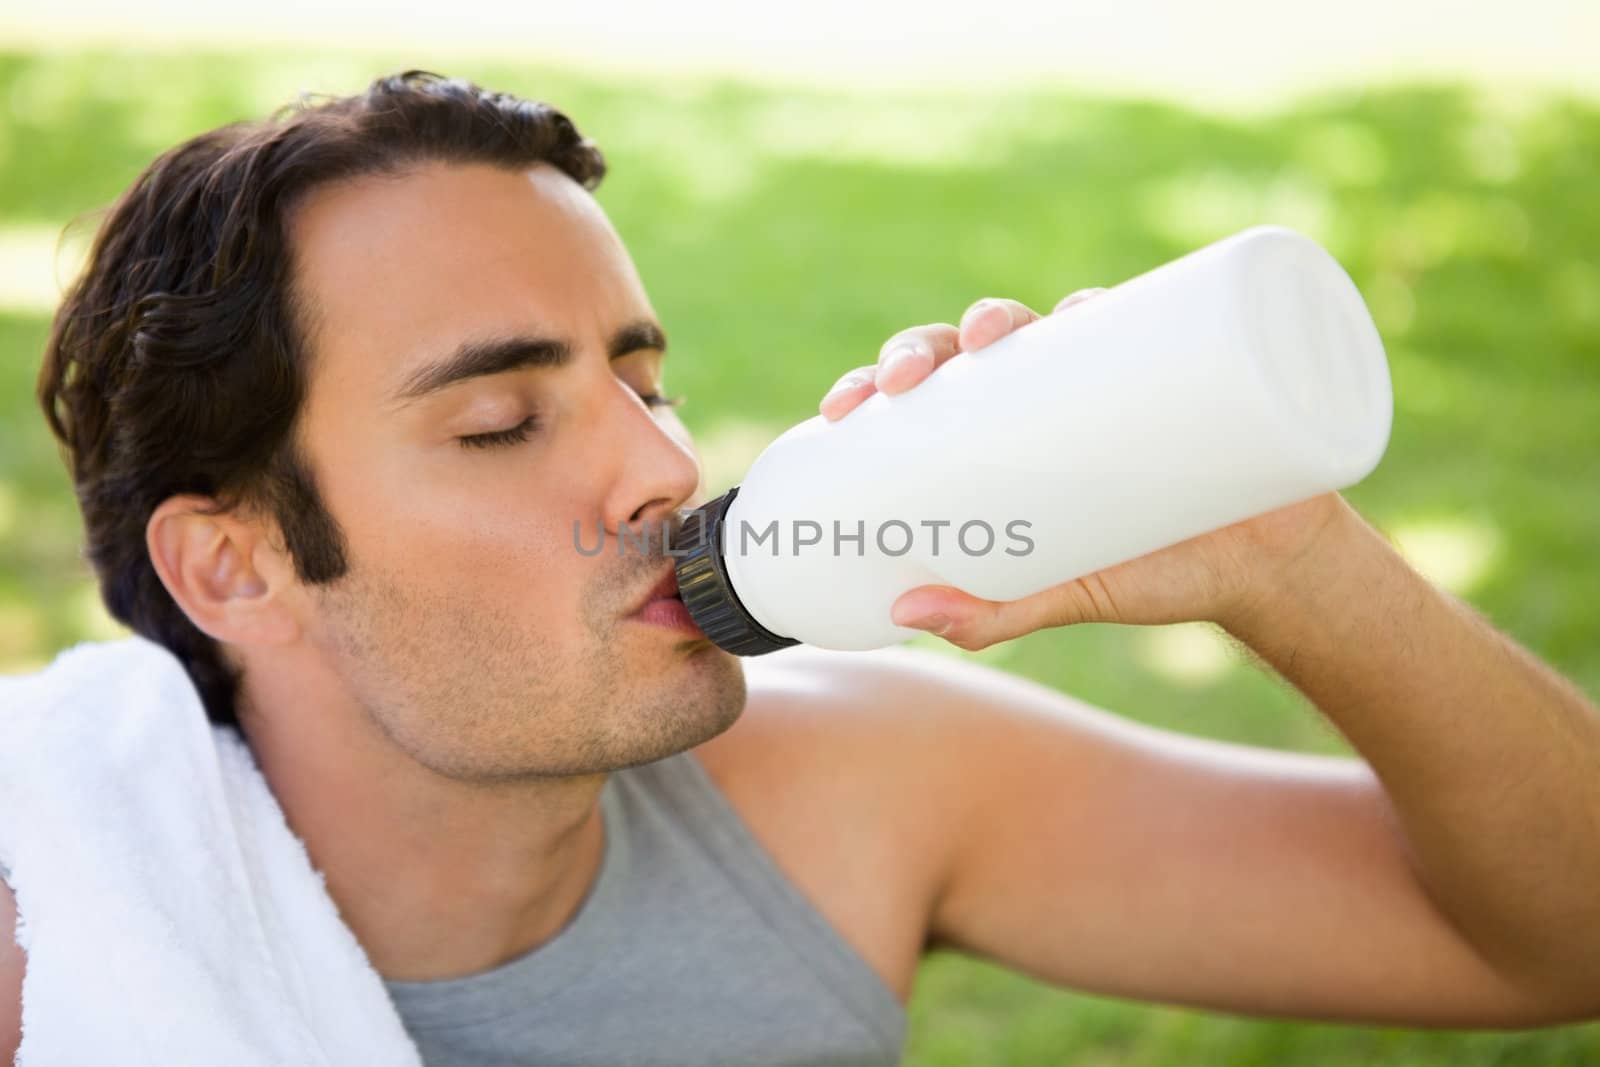 Man with a white towel on his shoulder drinking from a sports bottle while his eyes are closed